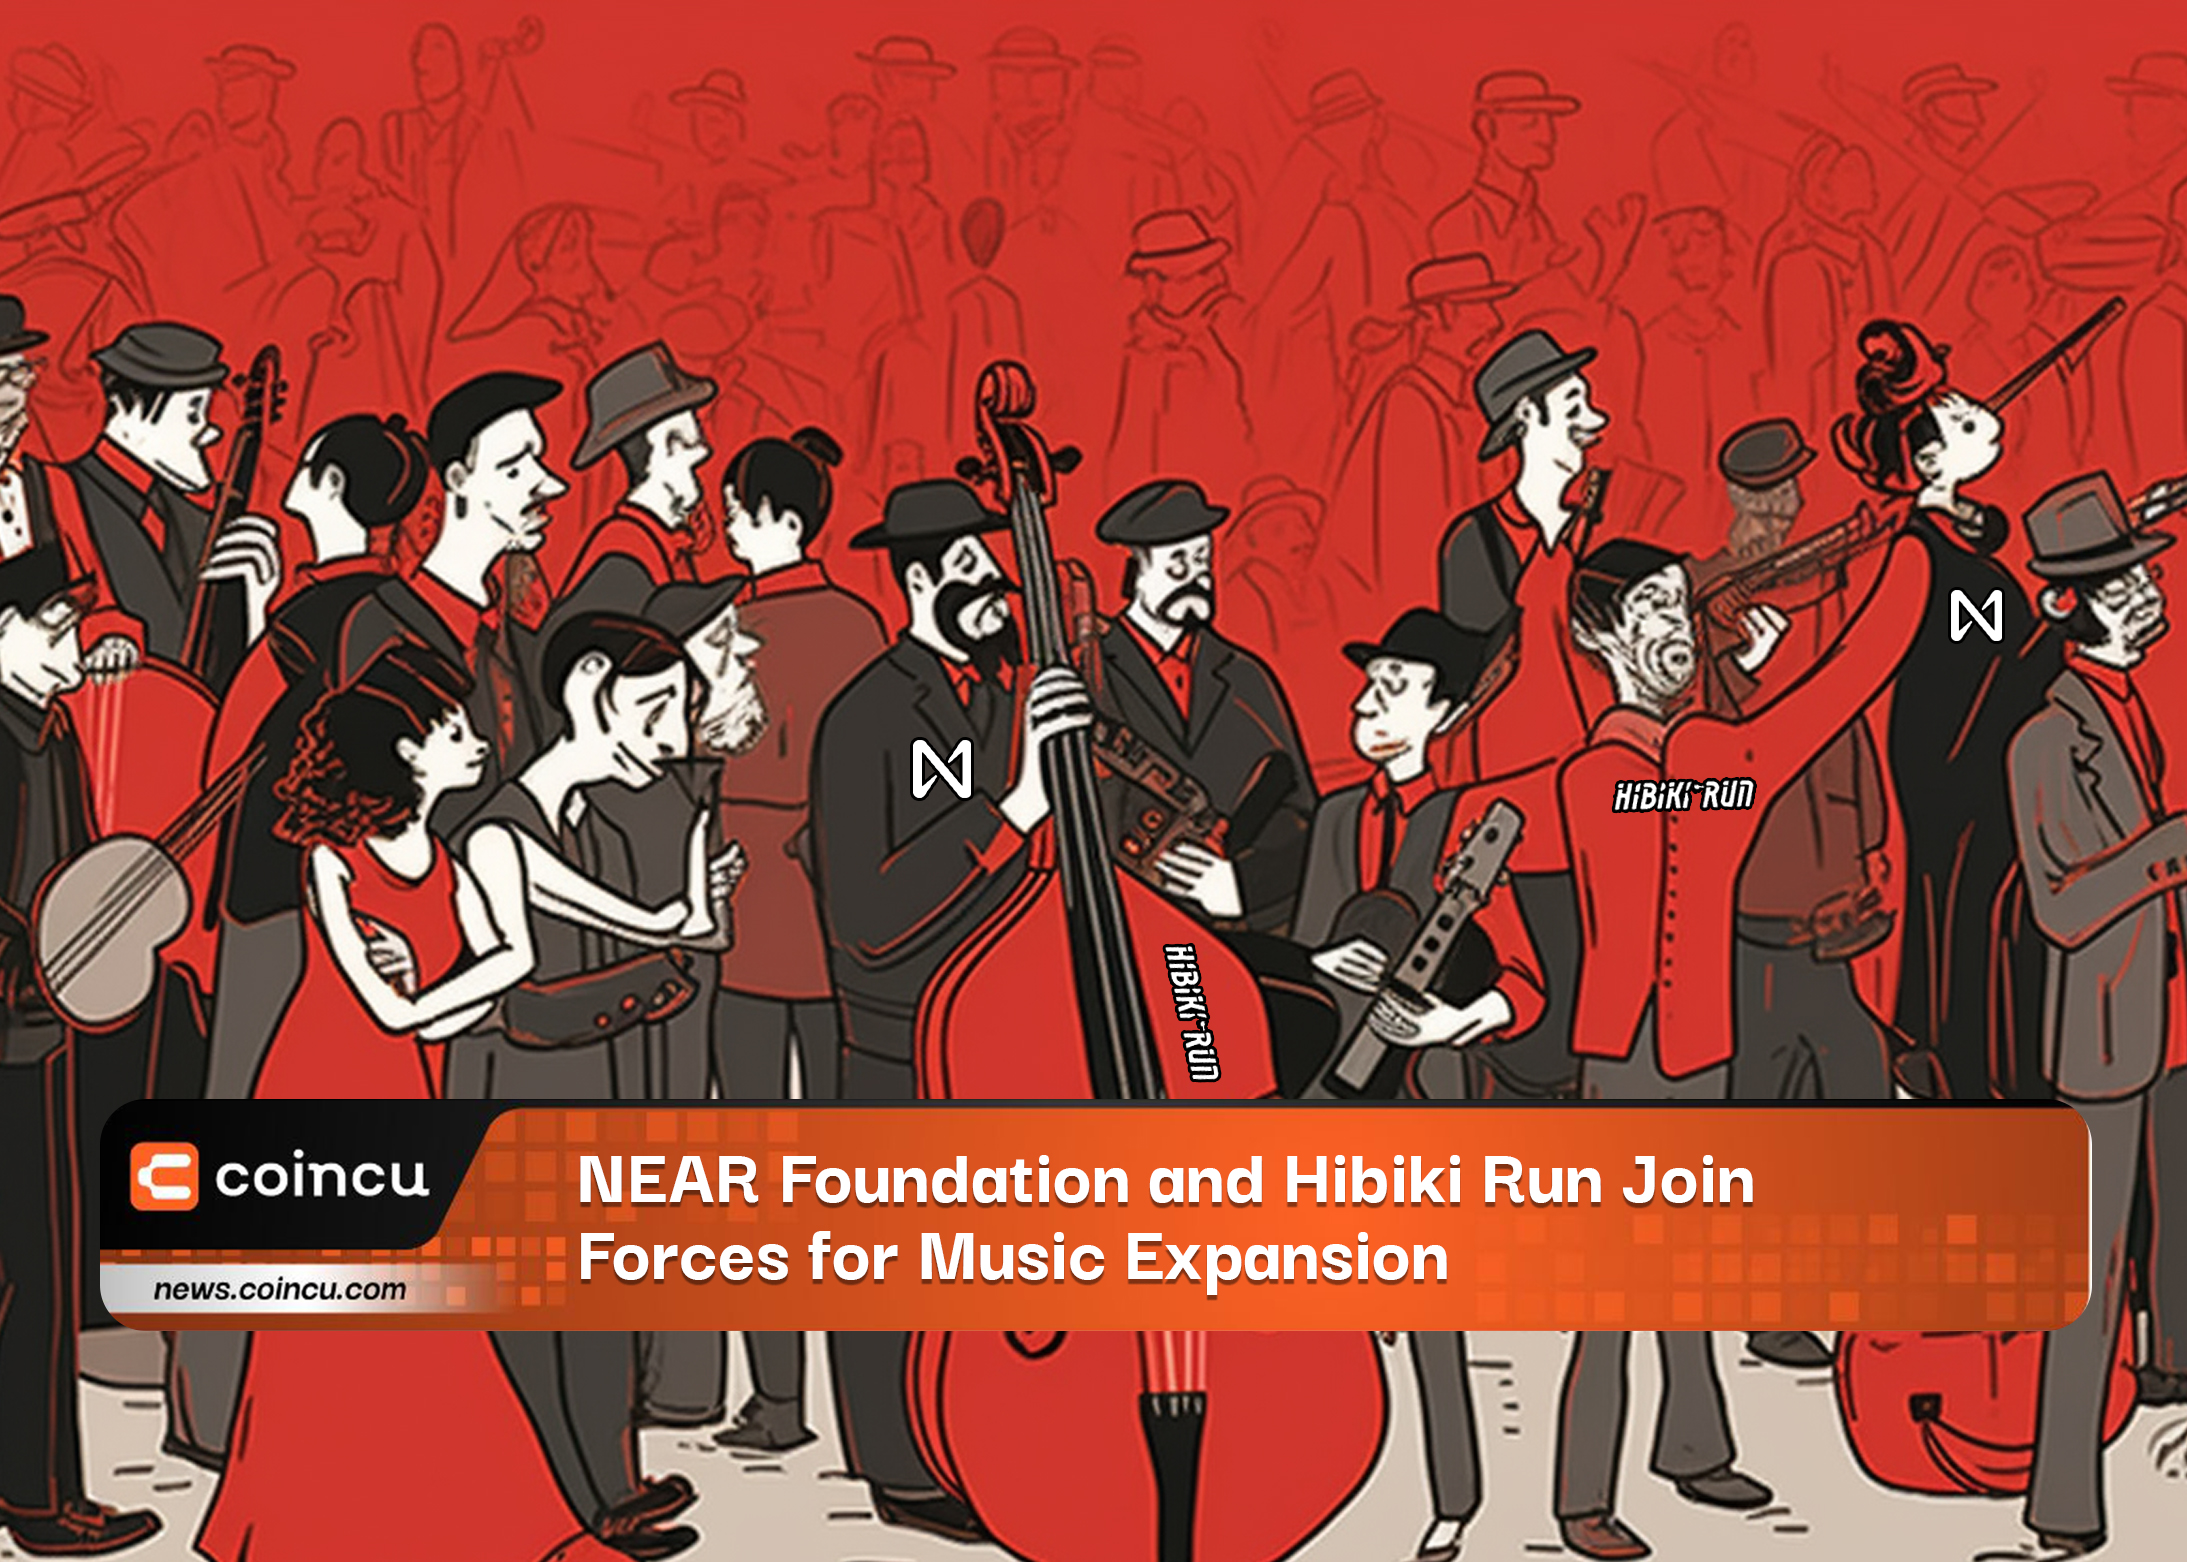 NEAR Foundation and Hibiki Run Join Forces for Music